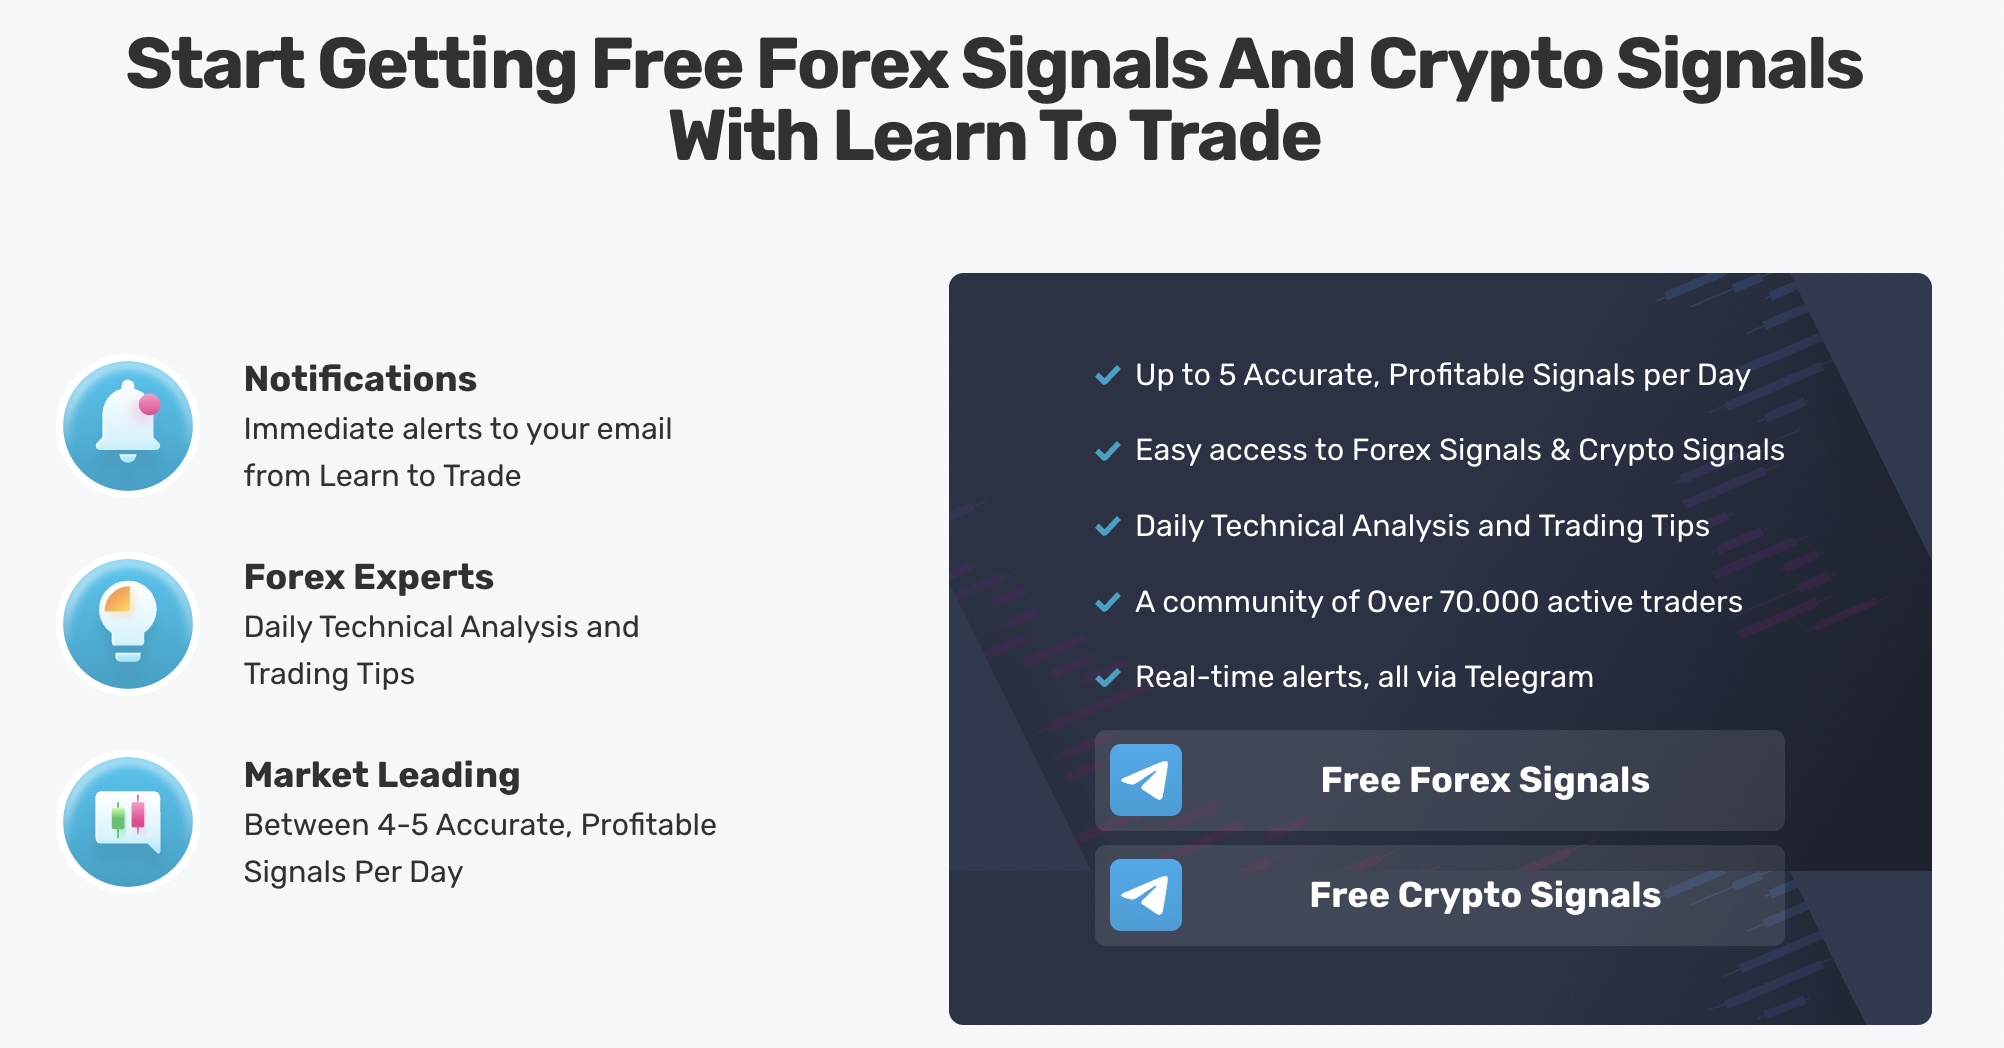 Forex signals are useful or not mt5634zba forex traders demo contest